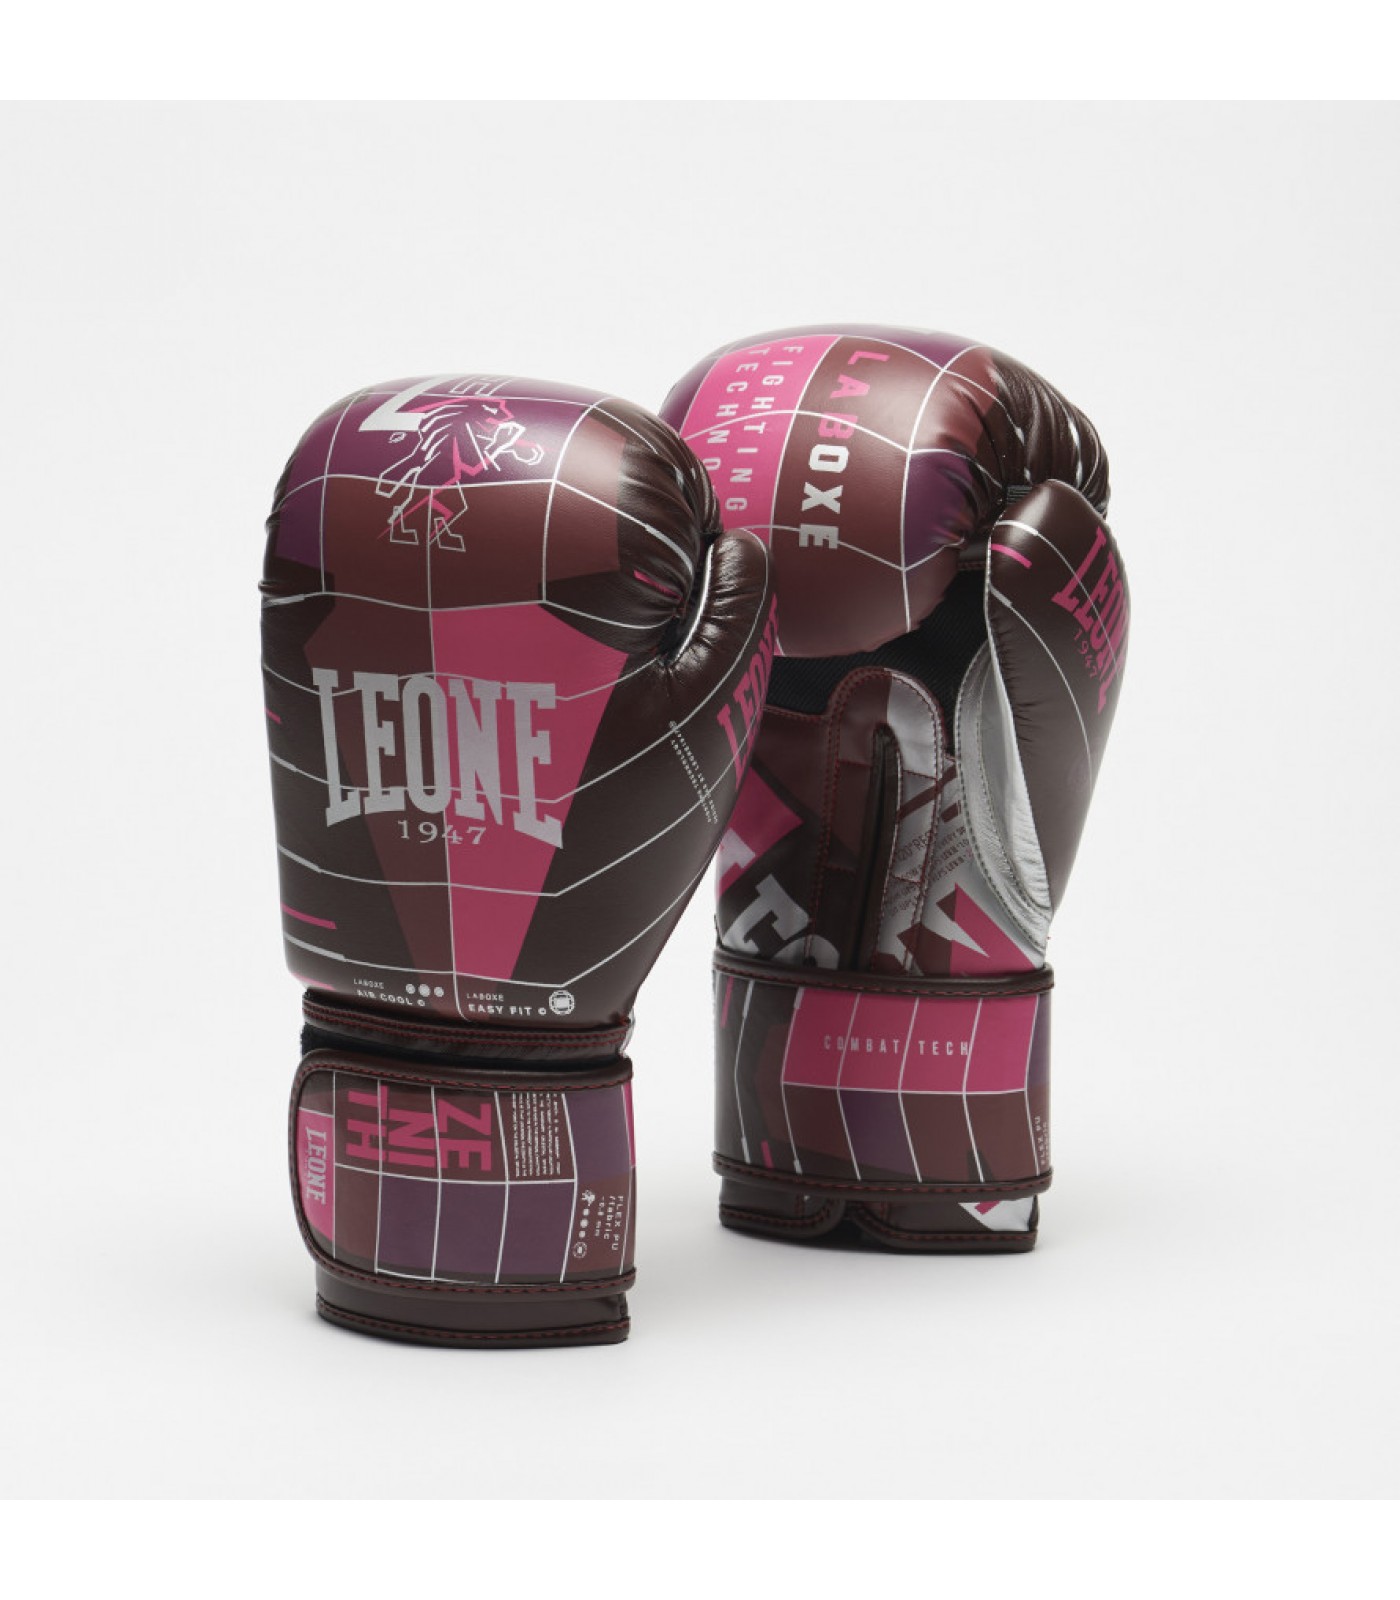 Leone - ZENITH BOXING GLOVES GN323 / PINK